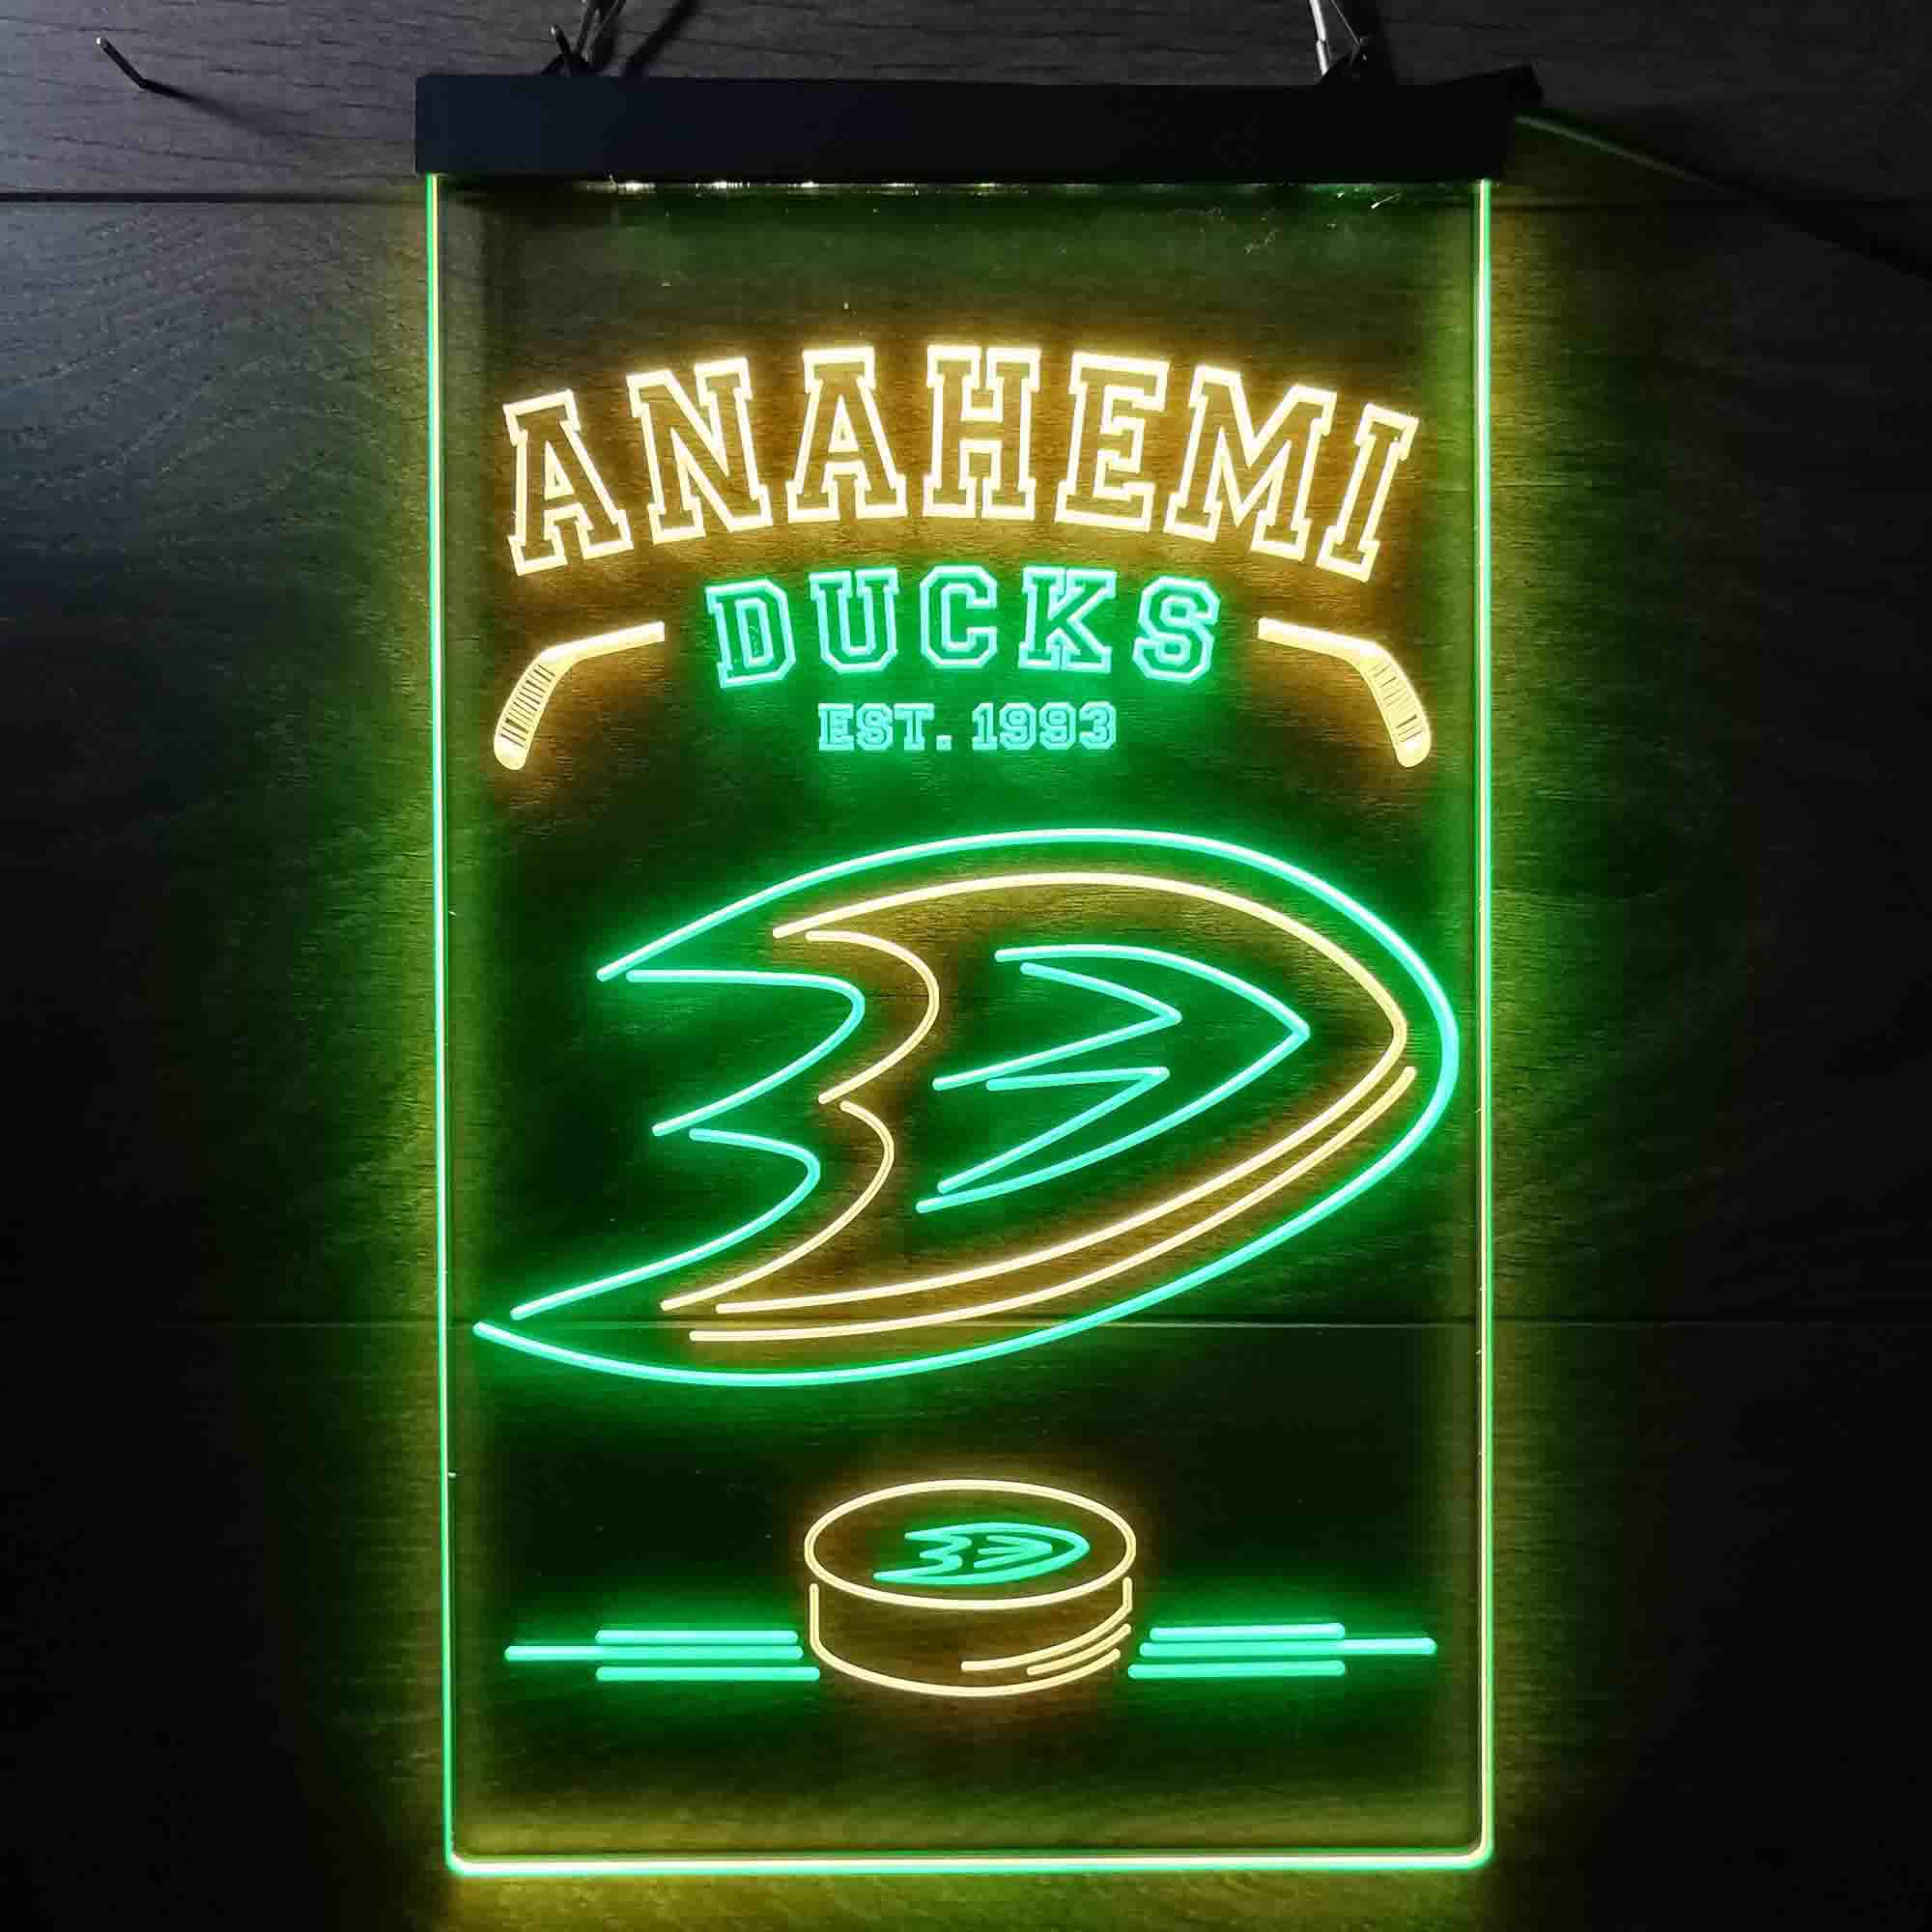 Custom Anahemi Ducks Est. 1993 NHL Neon-Like LED Sign - Father's Day Gift - ProLedSign